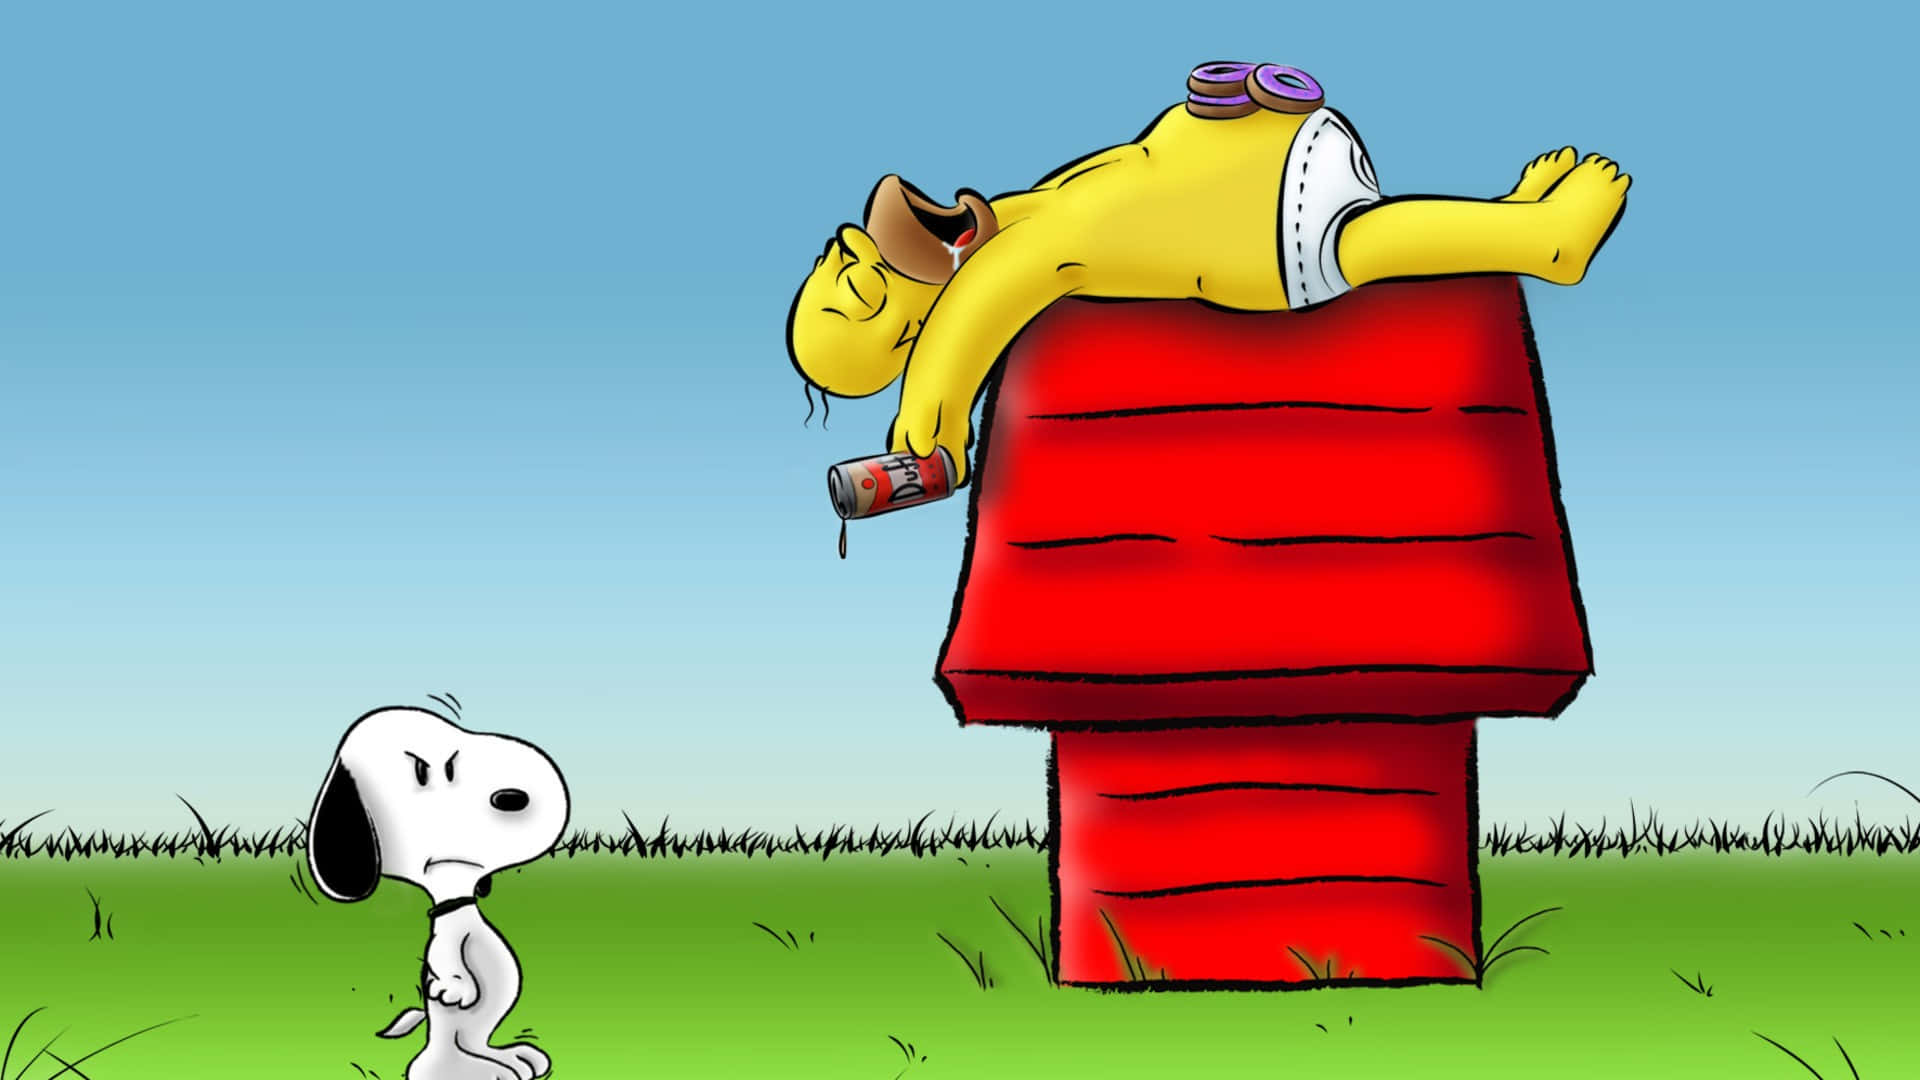 200+] Snoopy Backgrounds